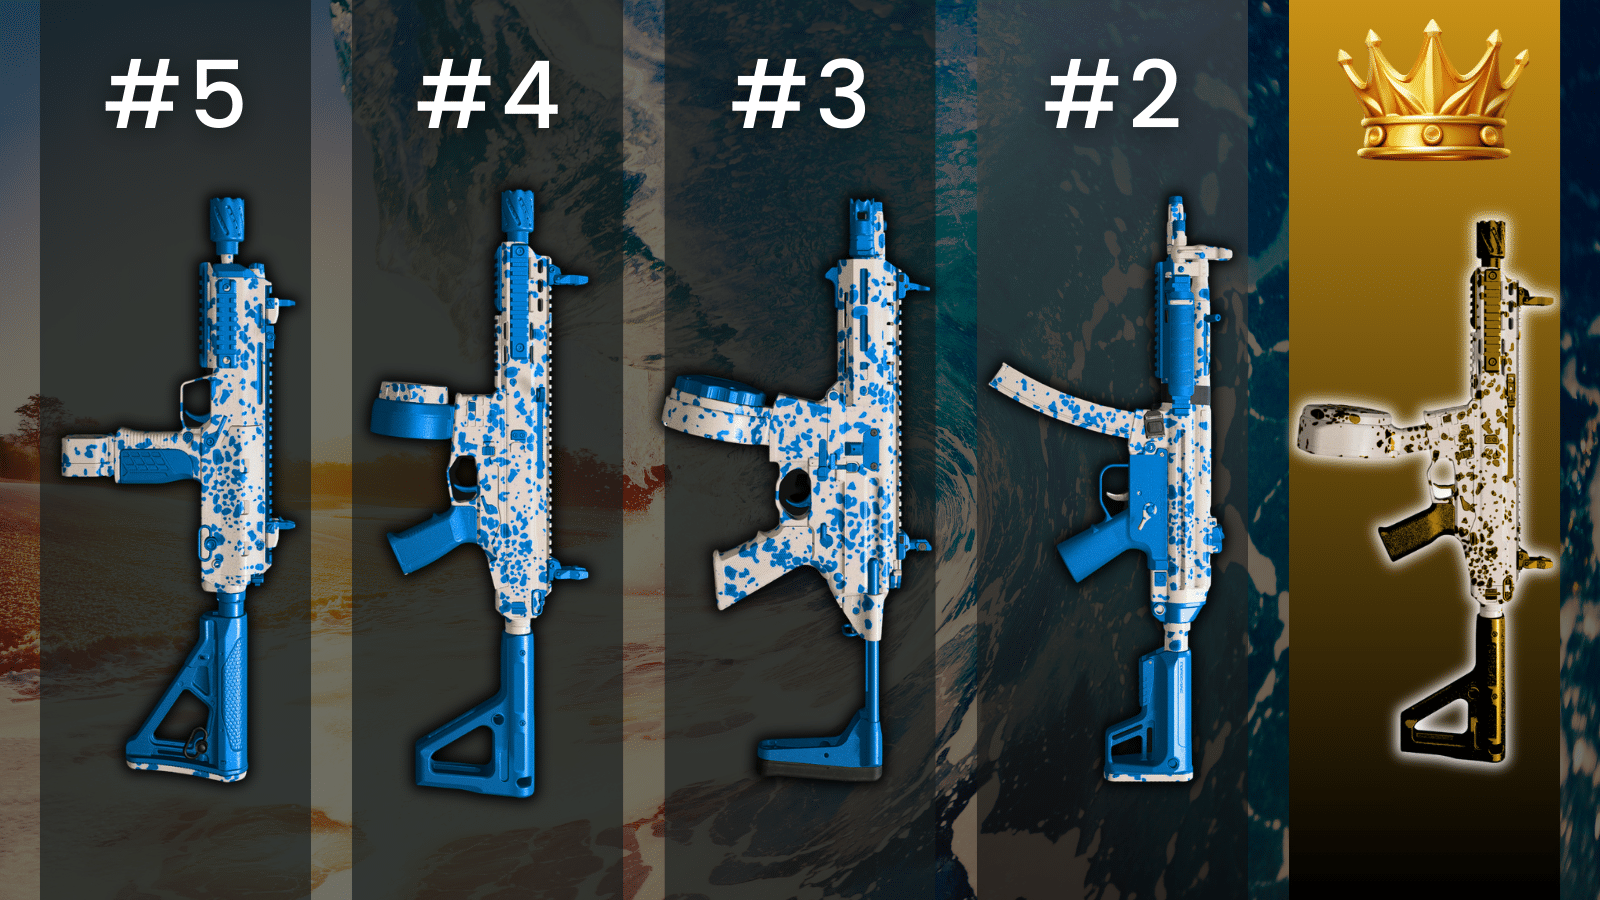 WARZONE 2: Top 5 BEST SMG LOADOUTS To Use! (WARZONE 2 Meta Weapons) 